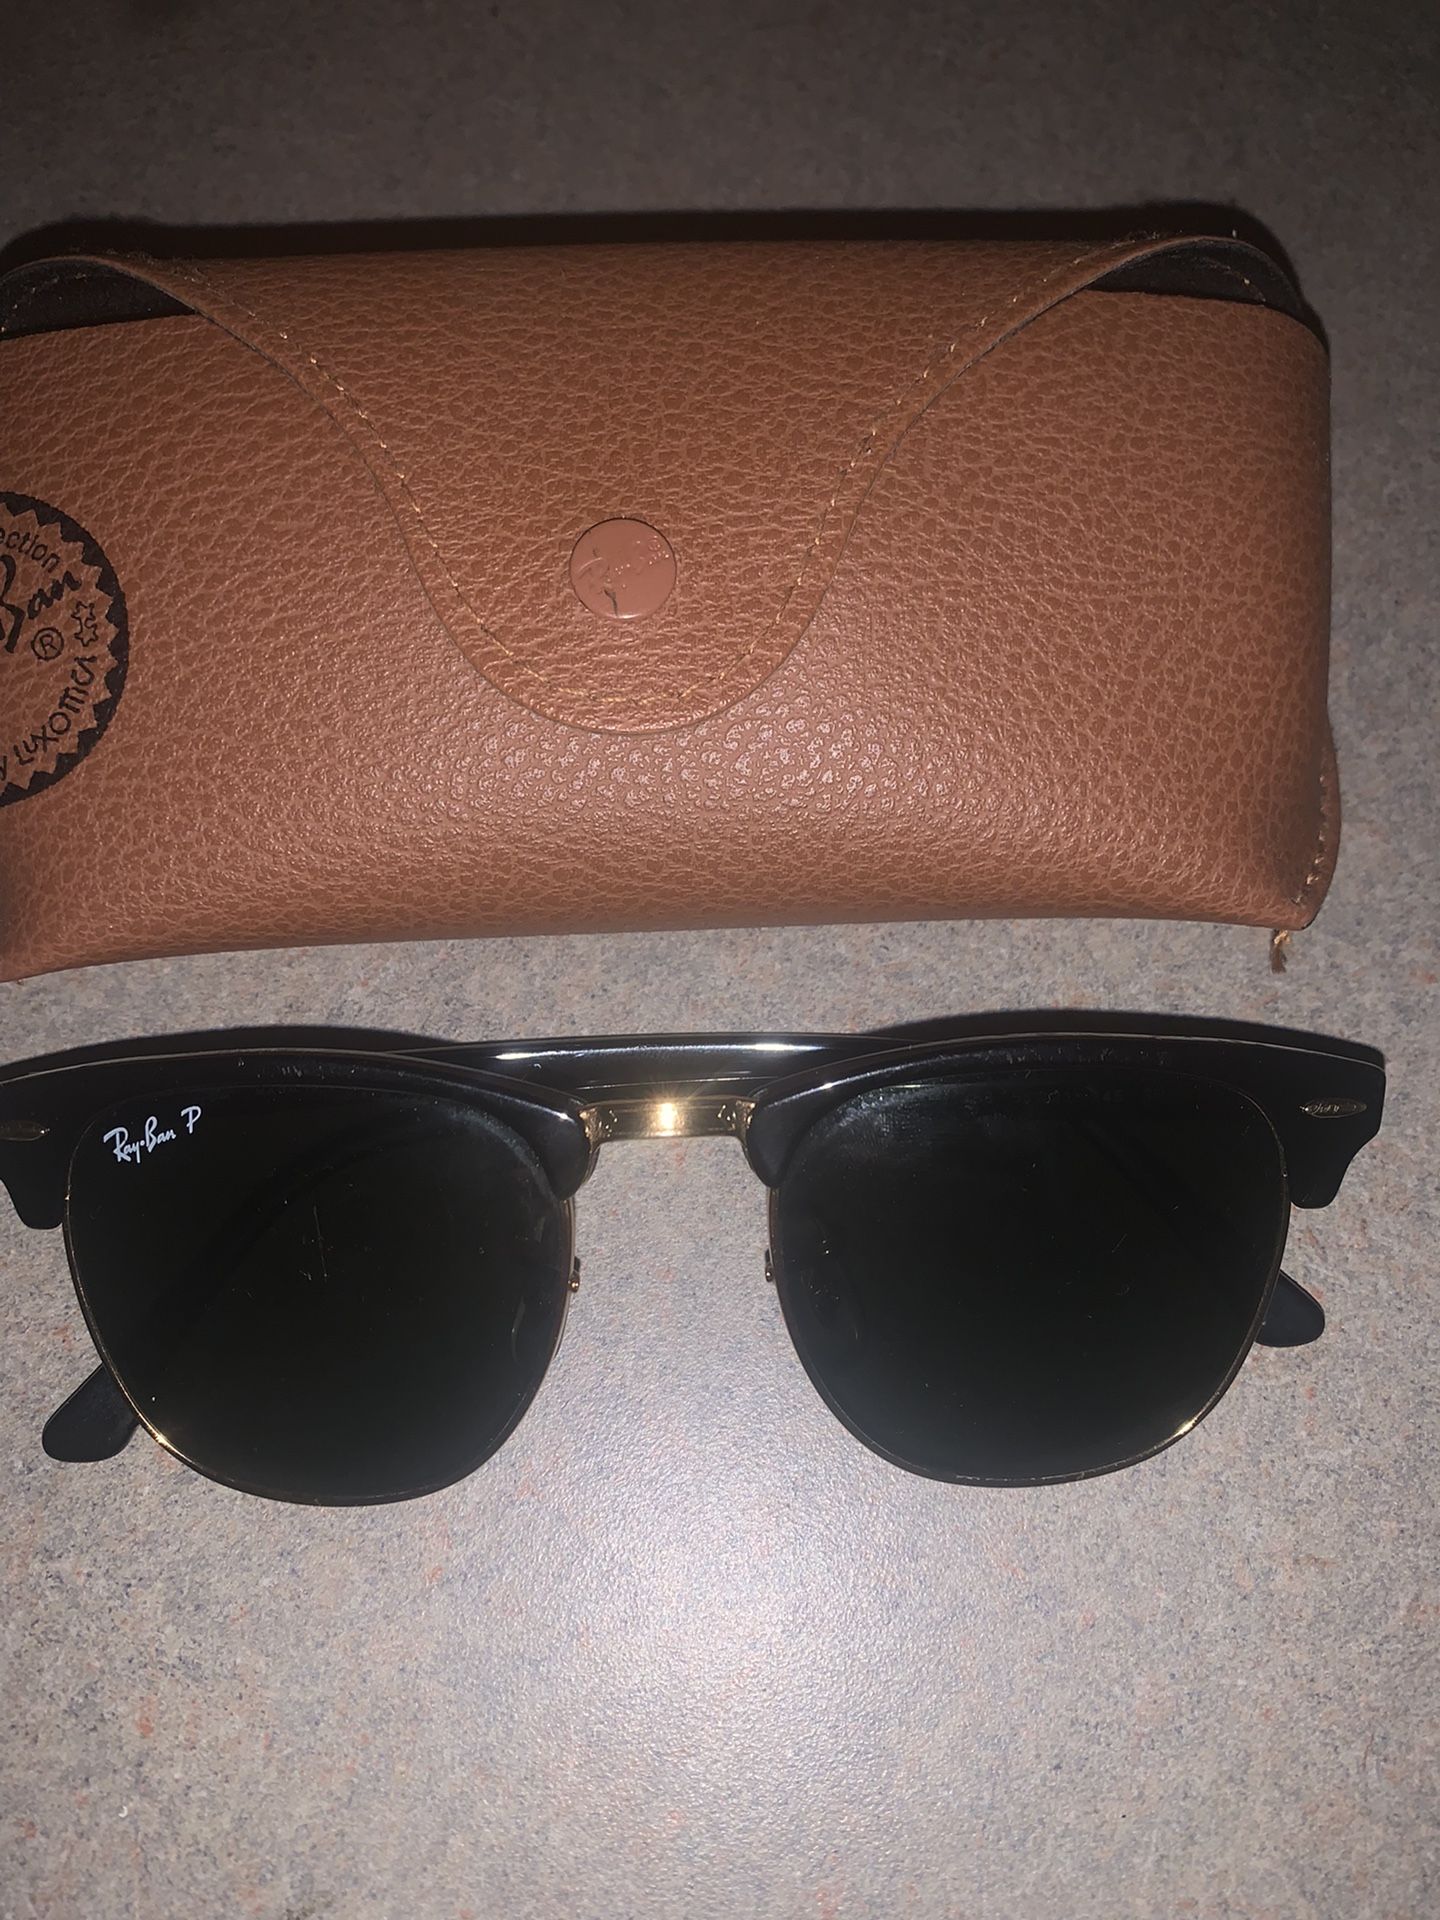 Rayban Clubmasters 